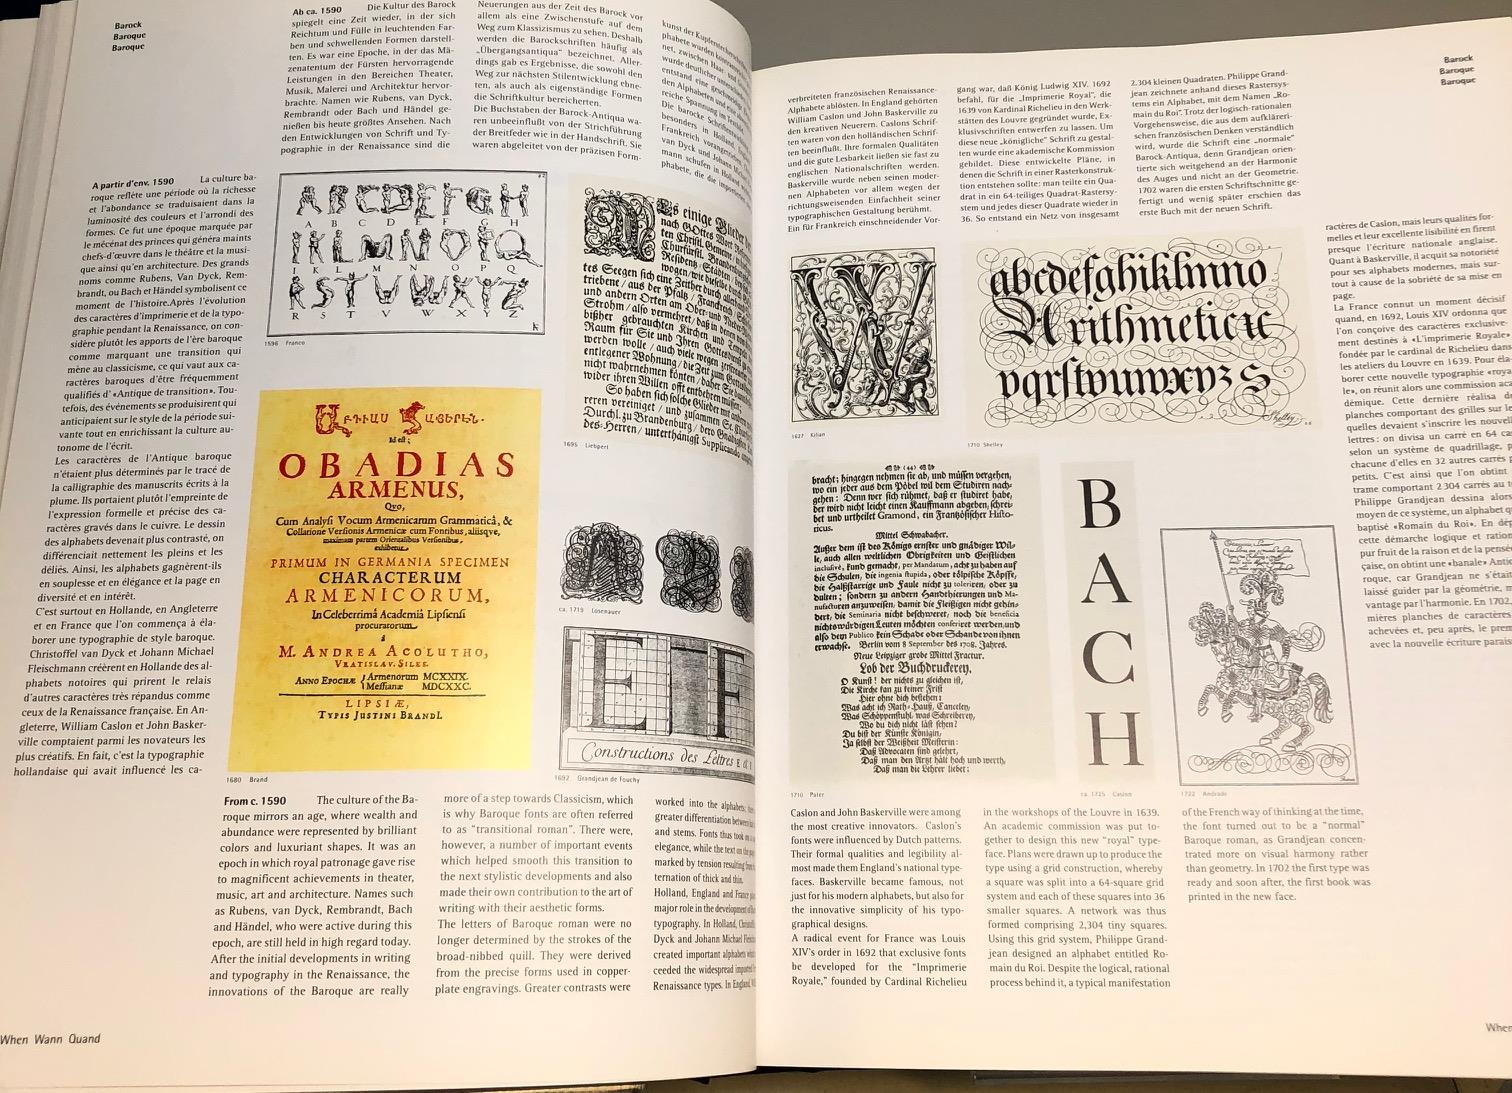 Designology: How—and Why—Did Novelty Typography Emerge? – PRINT Magazine